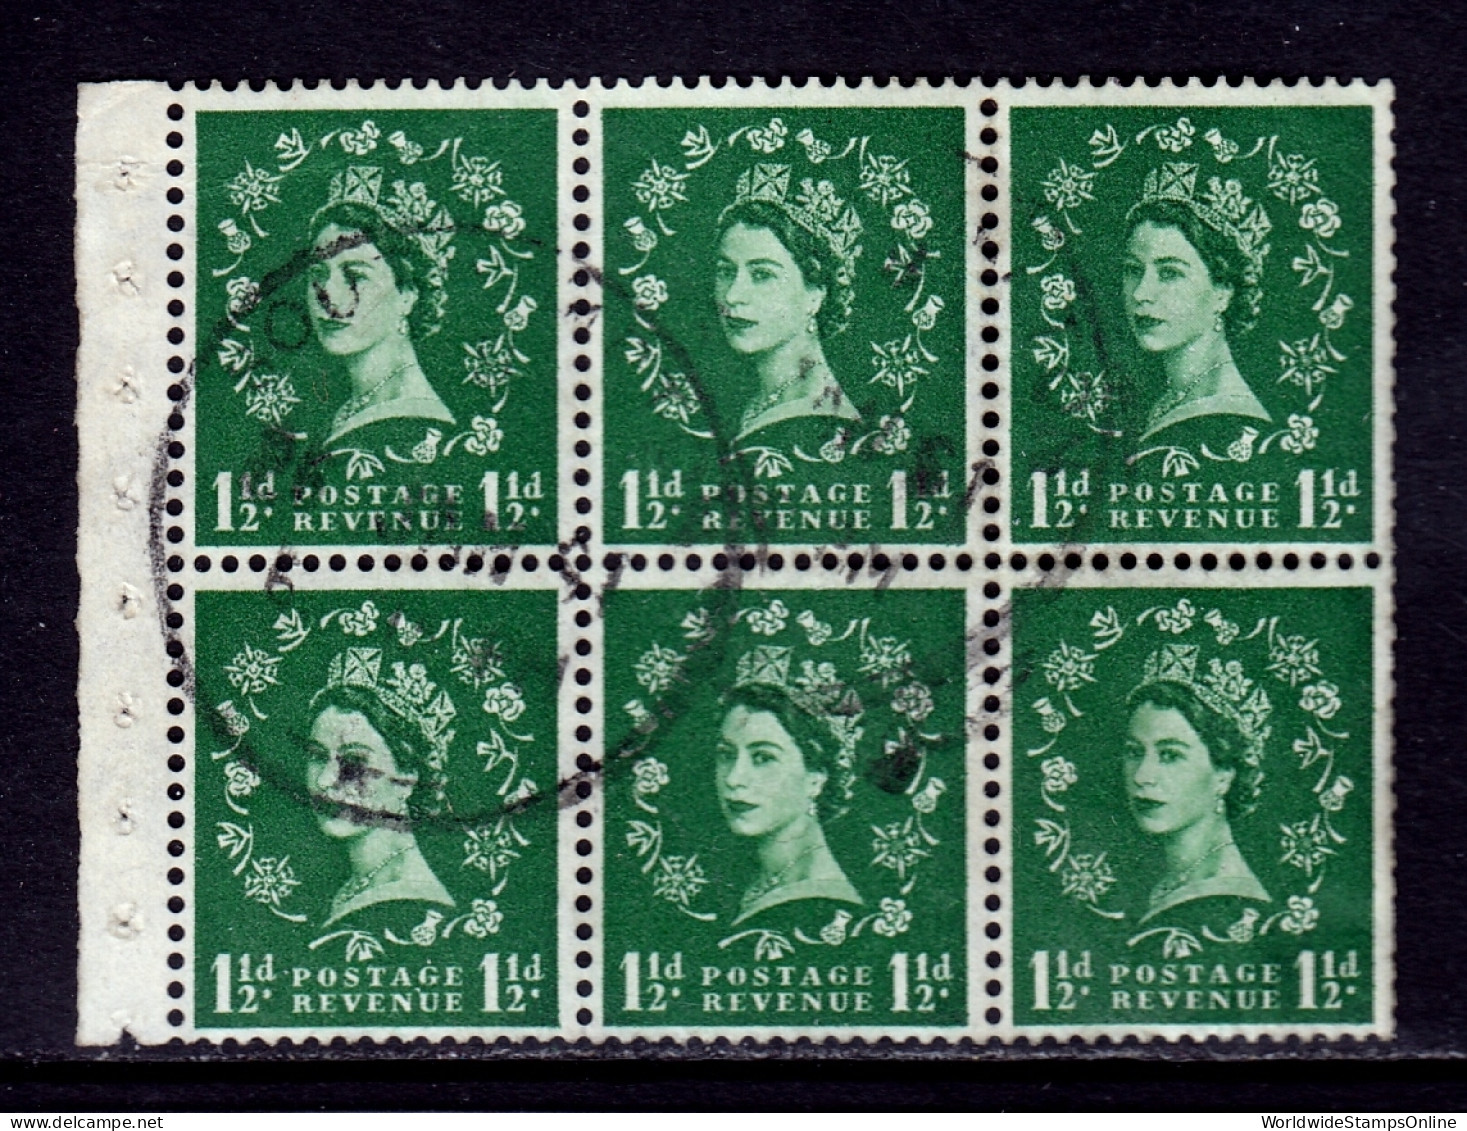 Great Britain - SG #572Wi - Used - Inverted Wmk., Full Booklet Pane - SG £7.50+ - Usados